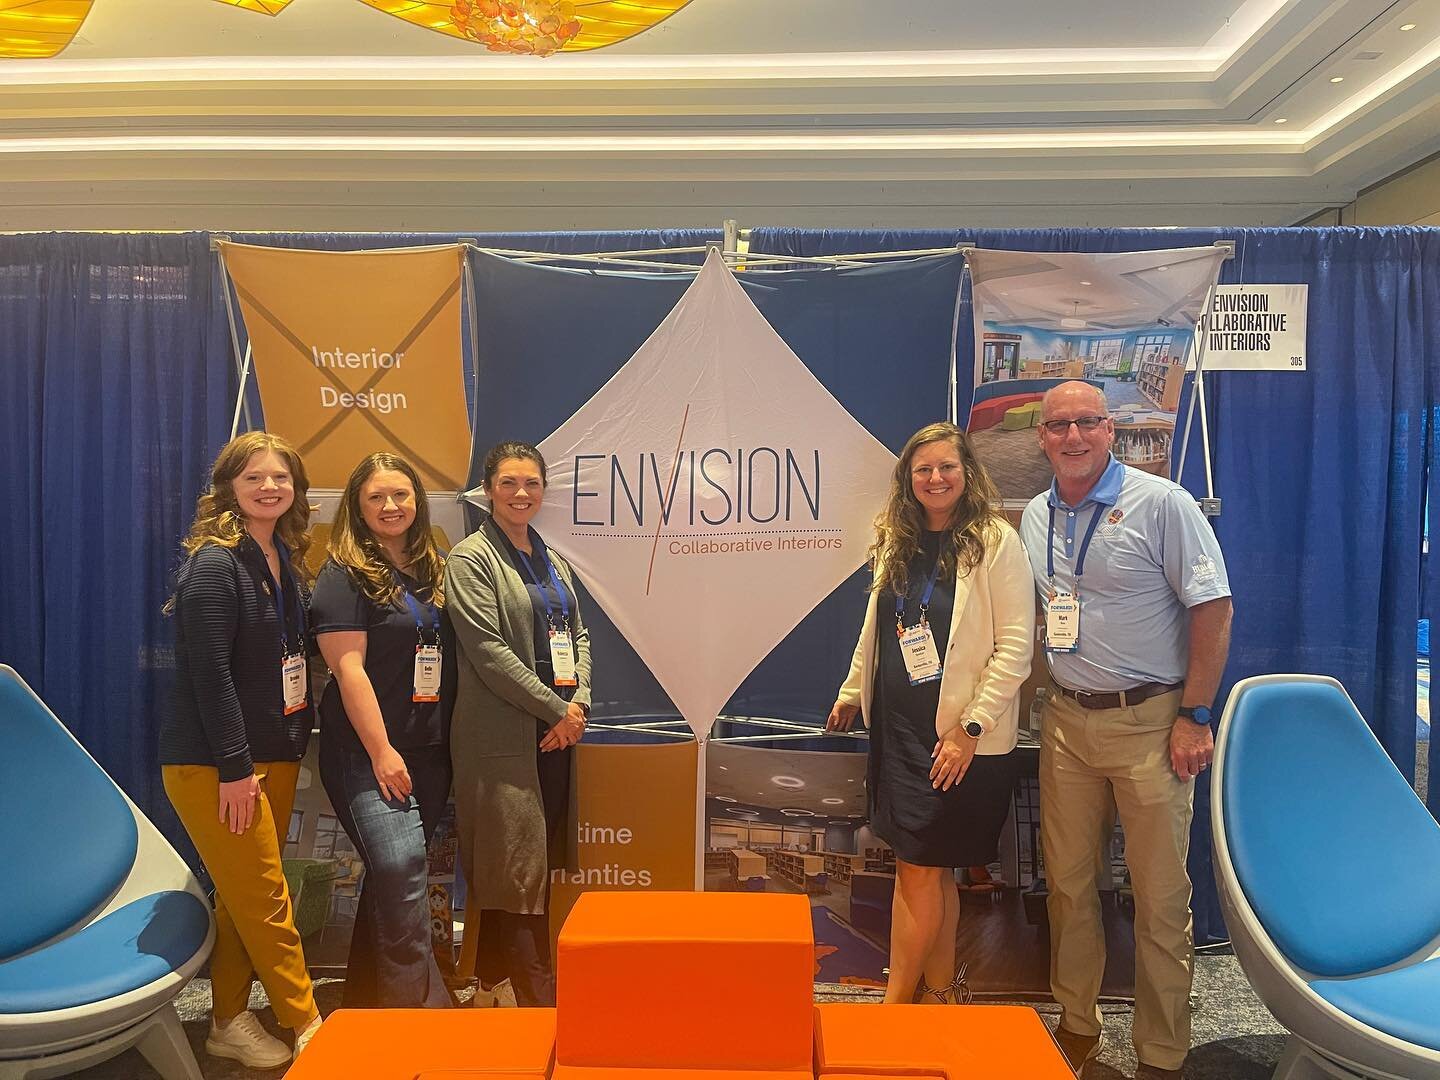 It&rsquo;s been a blast at the Boys &amp; Girls Clubs of America&rsquo;s National Conference! 

We had such a great time meeting everyone &amp; showing them what the Envision Team can provide for their clubs! 💙

#kifurniture #jjflooringgroup #bgcaco